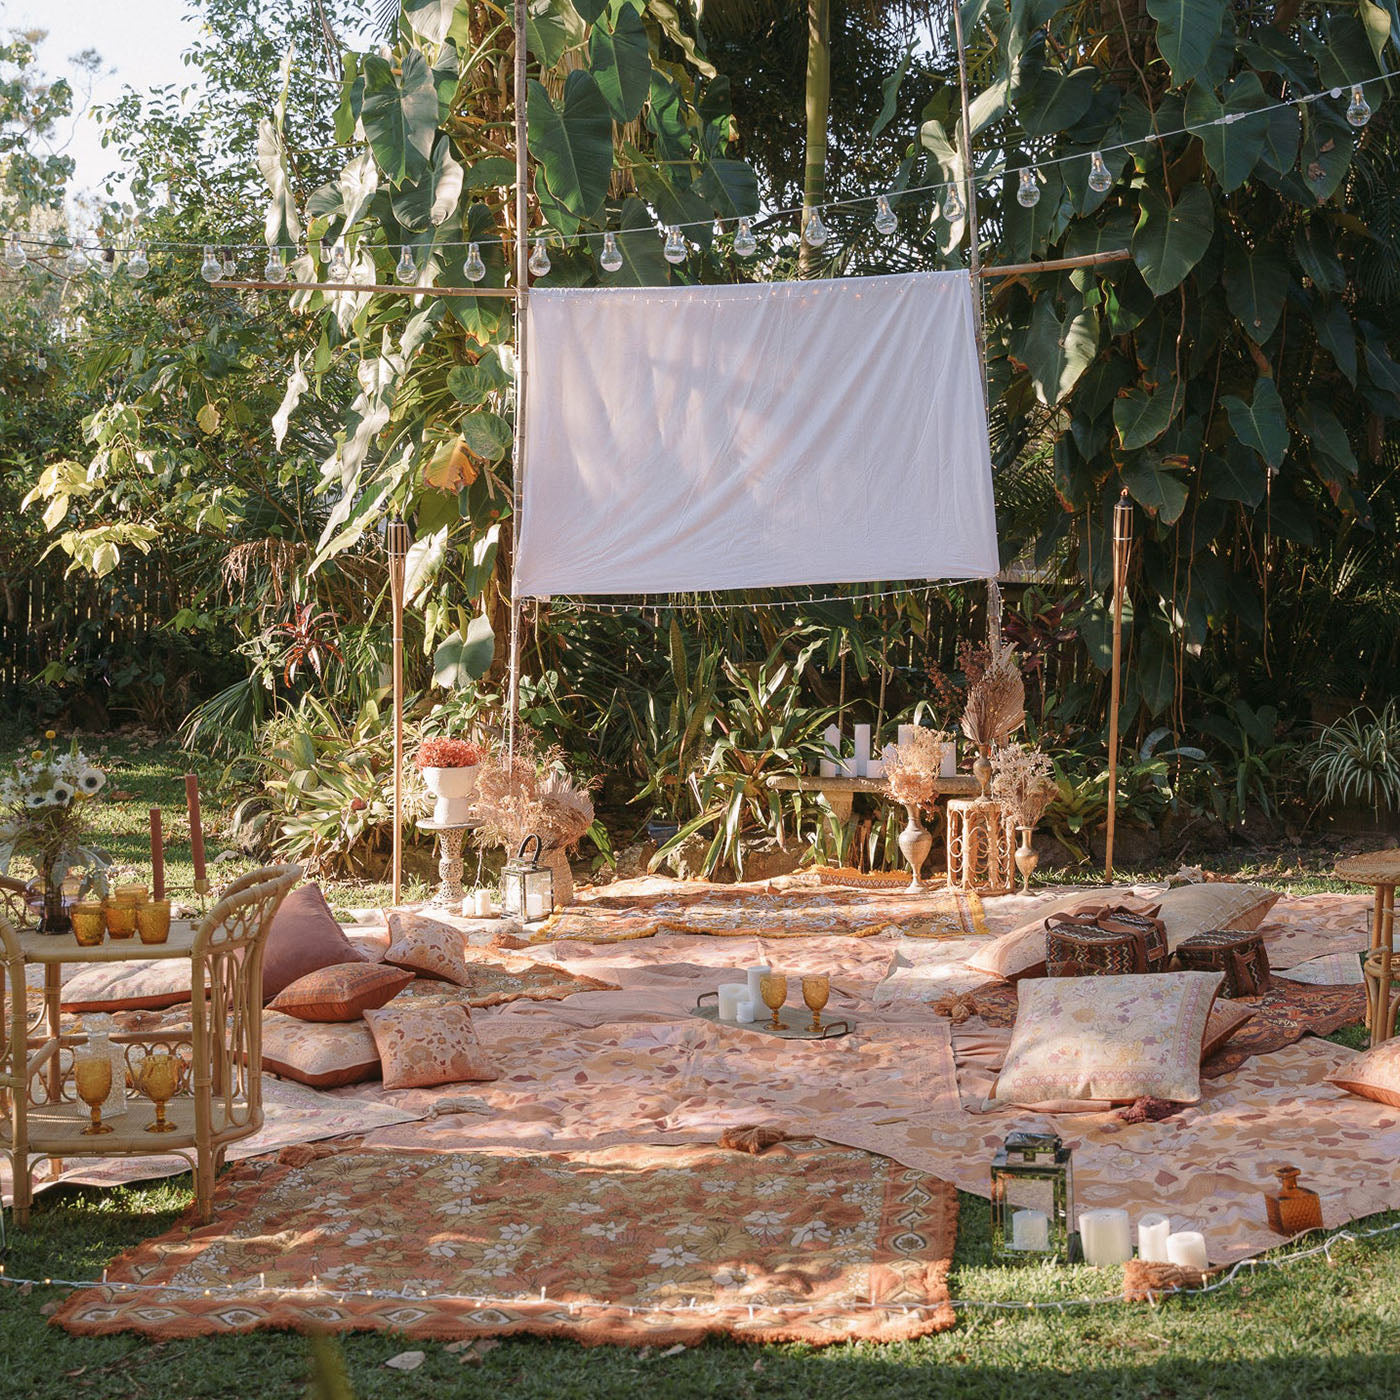 Create your own outdoor cinema